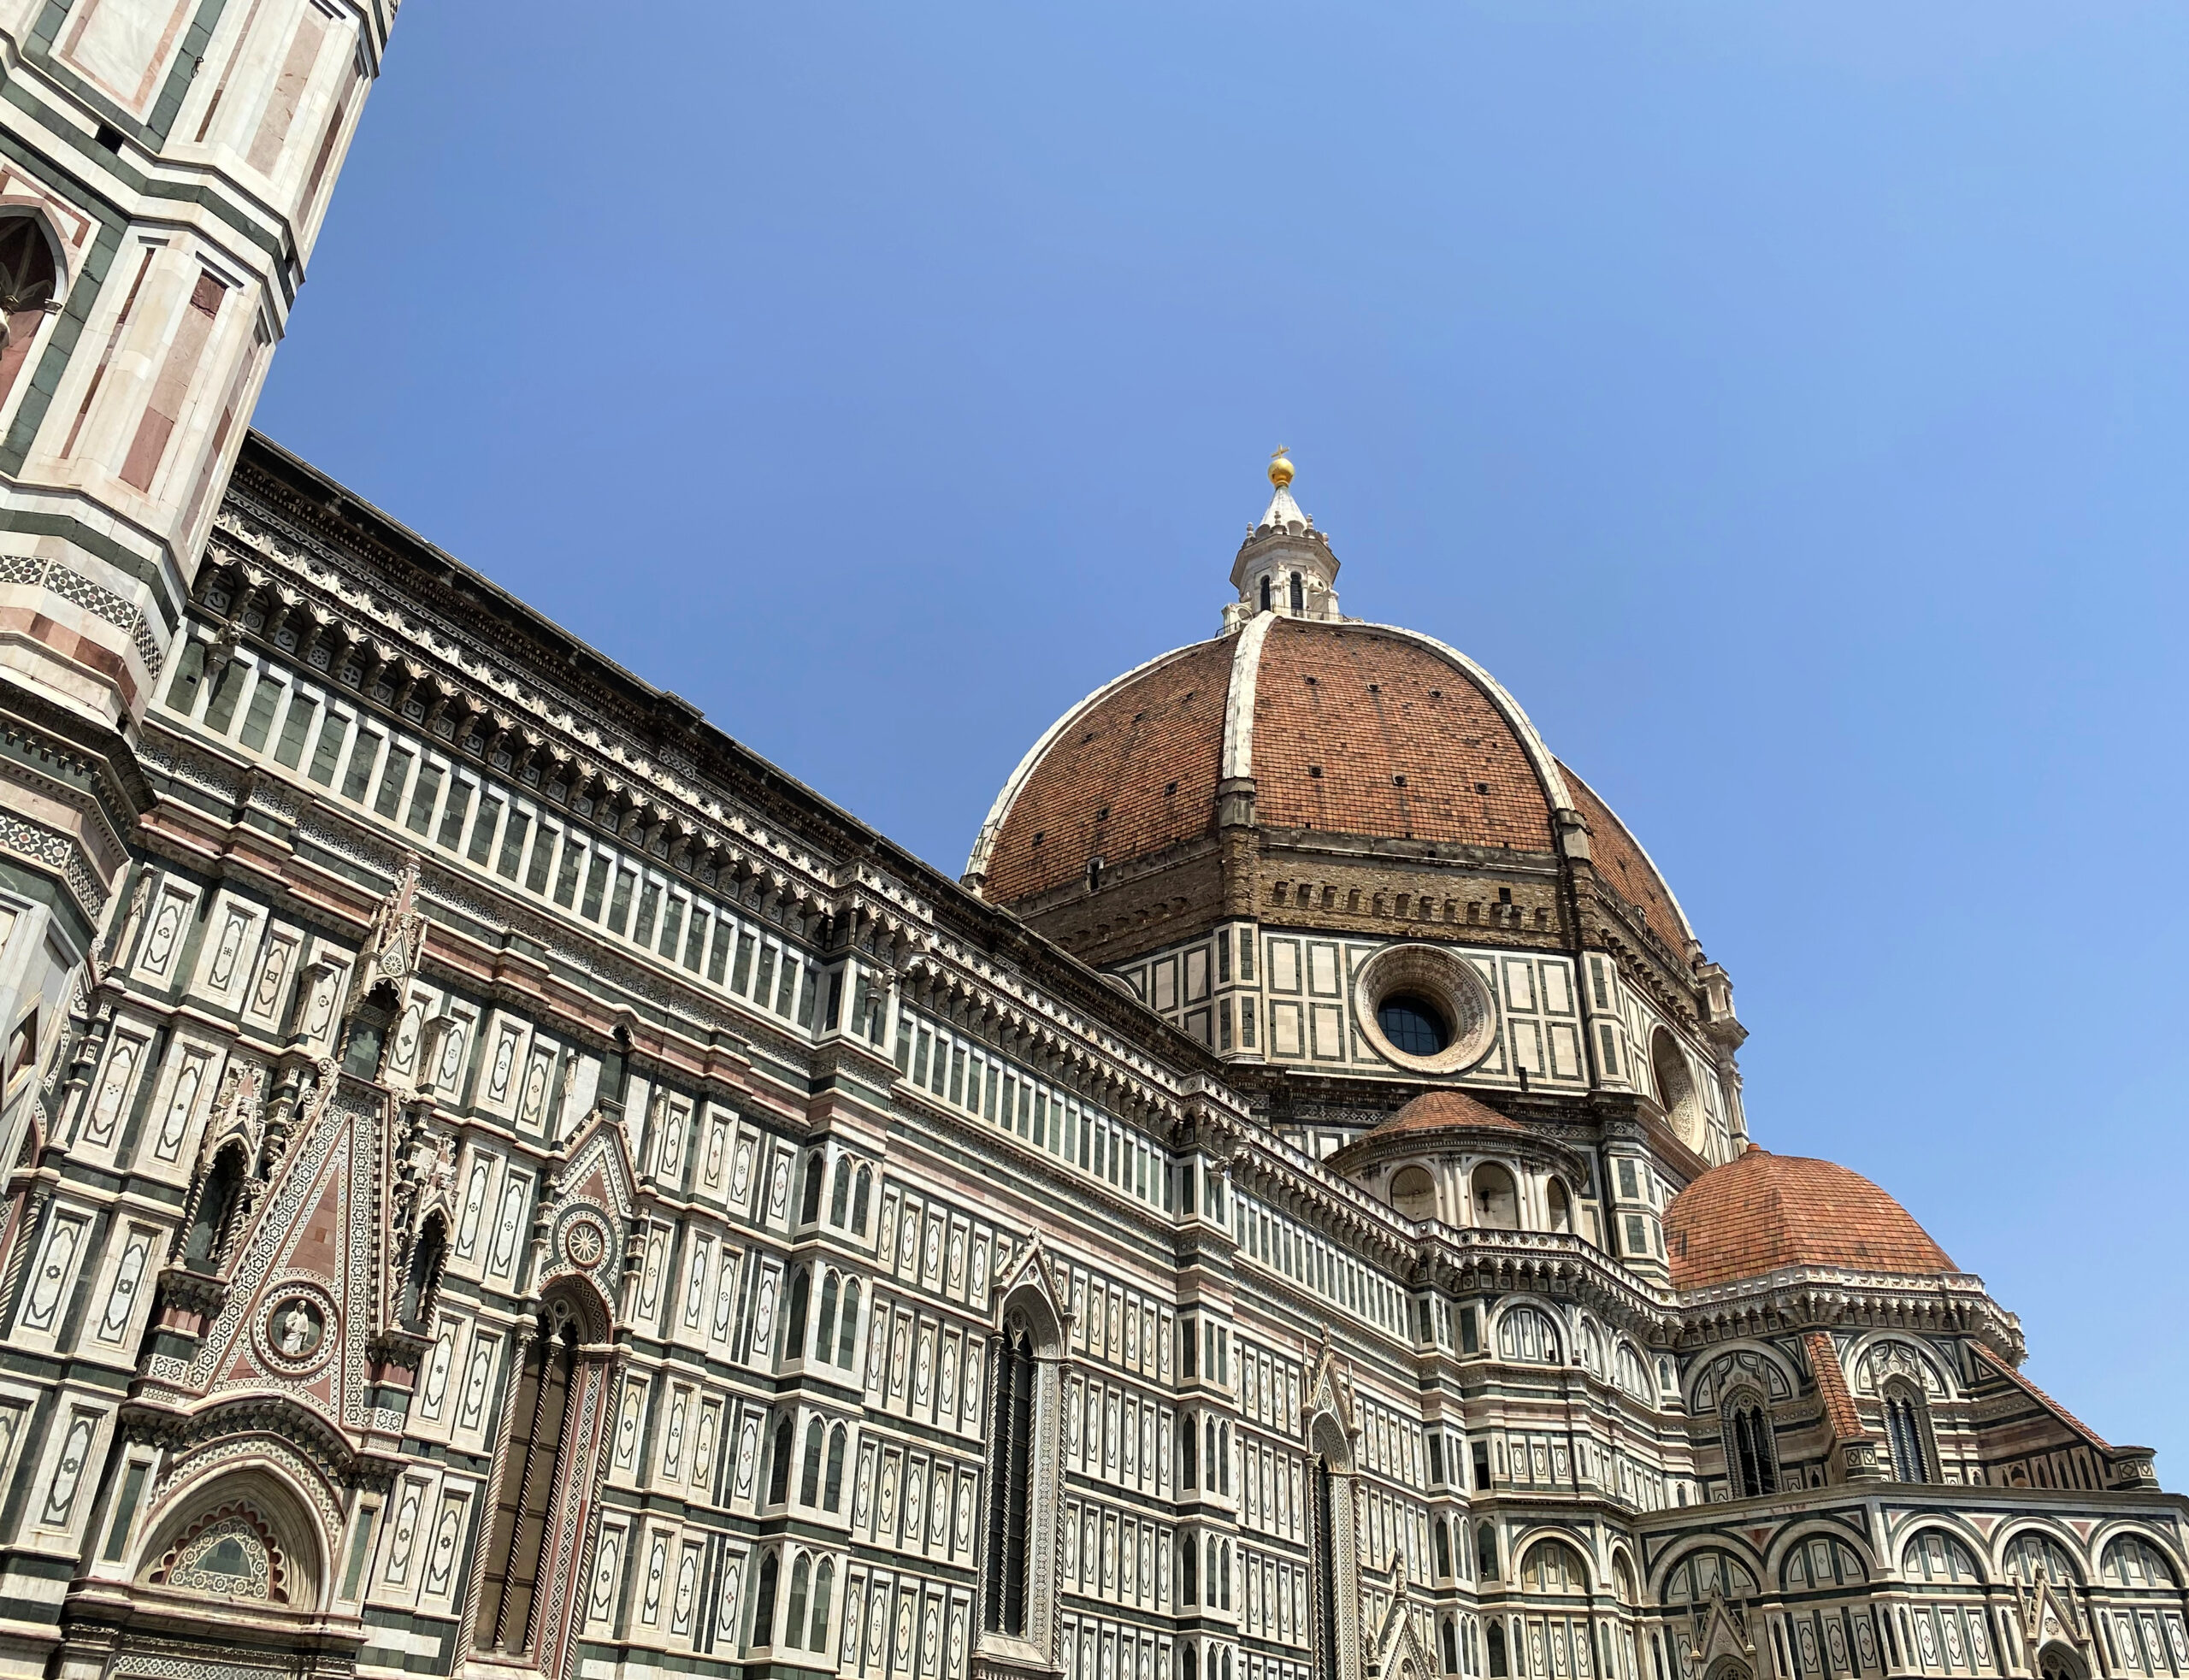 Il duomo in Florence, Italy architect guide gscinparis